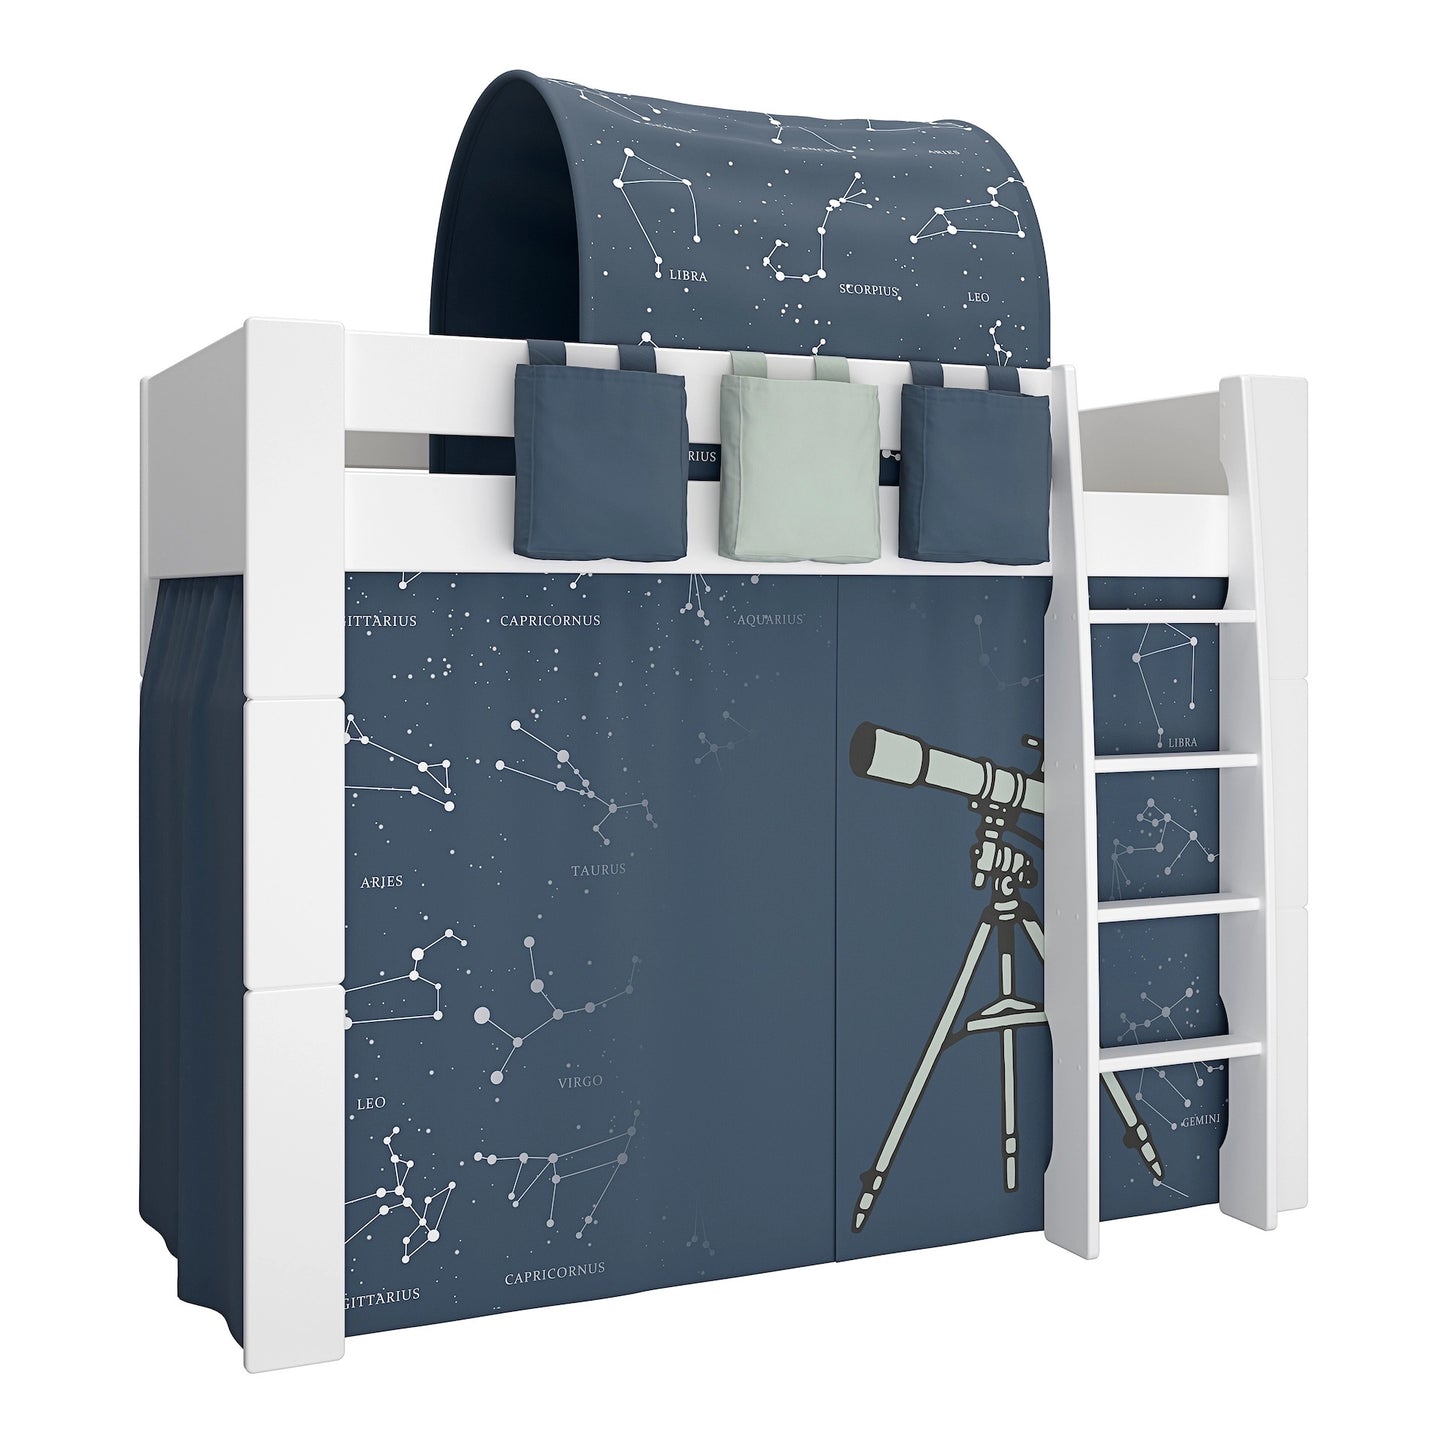 Furniture To Go Steens For Kids High Sleeper in Whitewash Grey Brown Lacquered, Includes - Universe Tent + Tunnel + 2 Pockets in Blue + 1 Pocket in Green